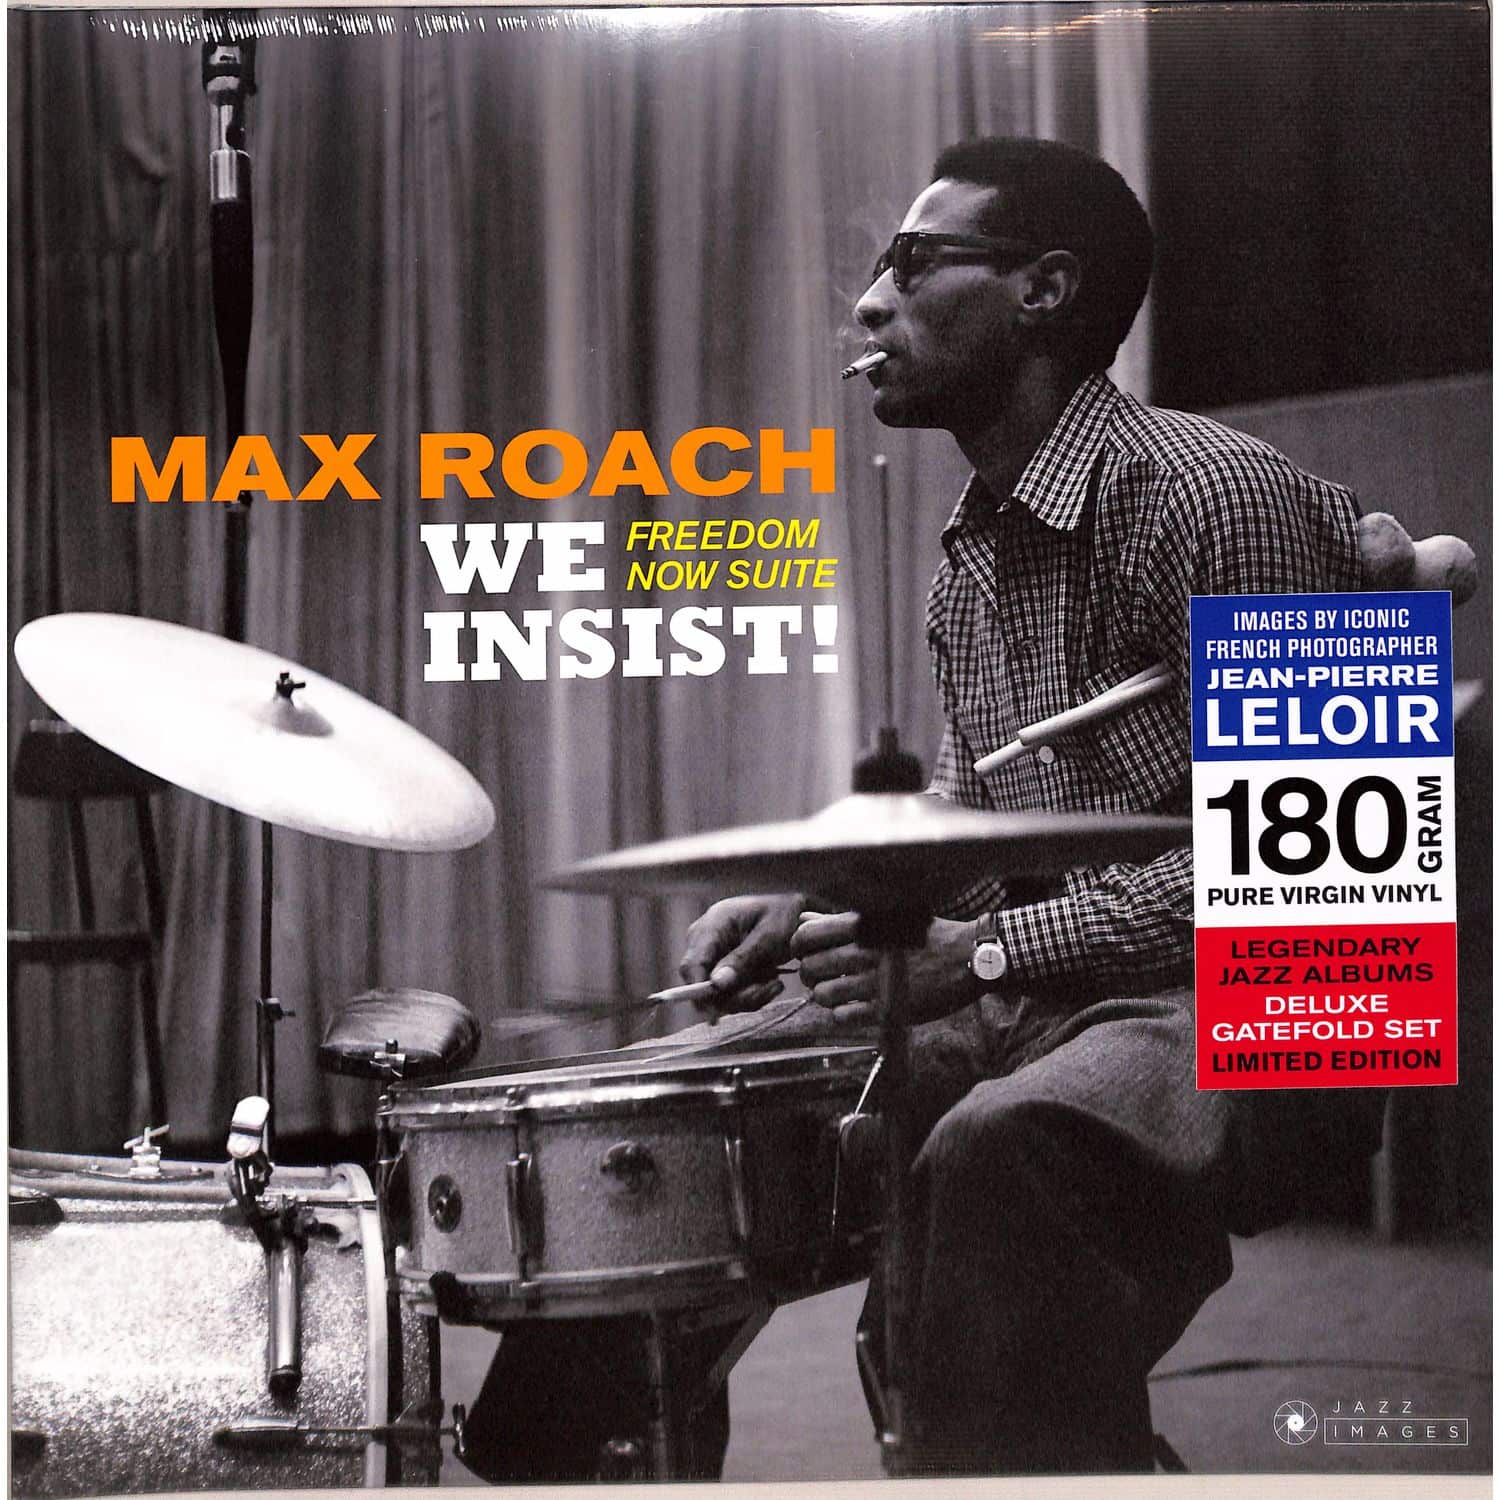 Max Roach - WE INSIST! FREEDOM NOW SUITE 